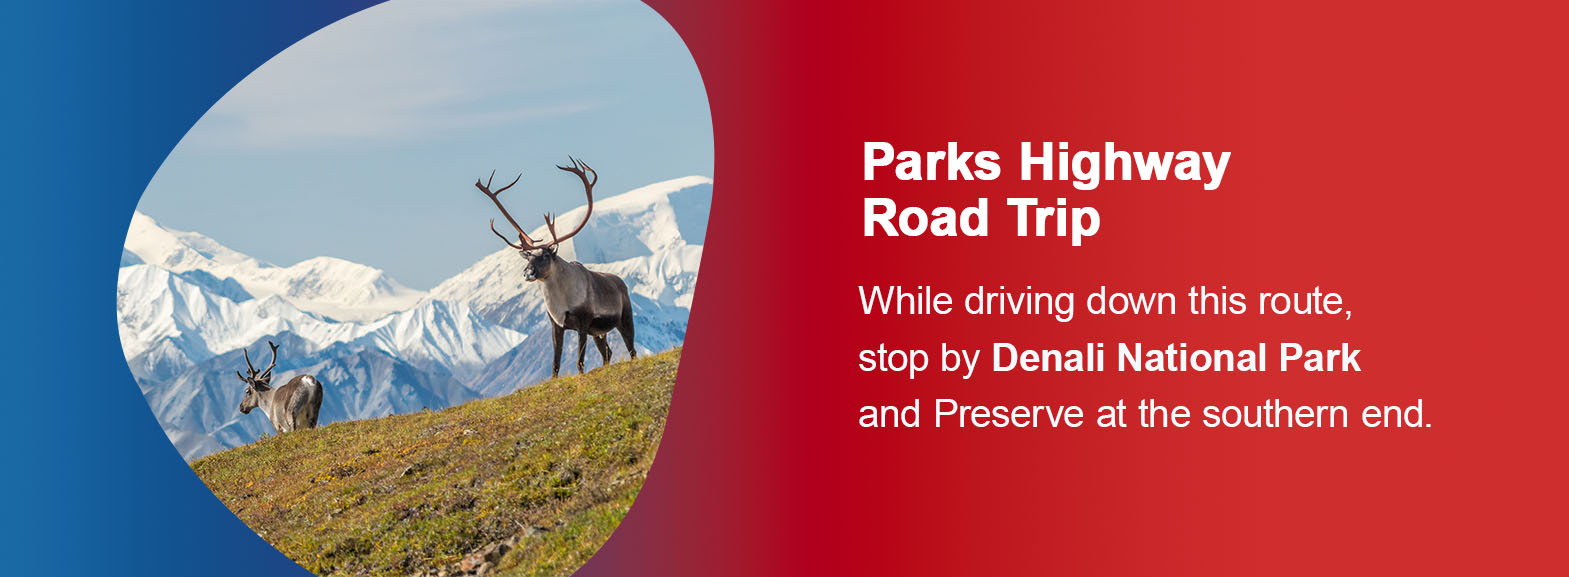 Parks Highway Road Trip. While driving down this route, stop by Denali National Park and Preserve at the southern end.